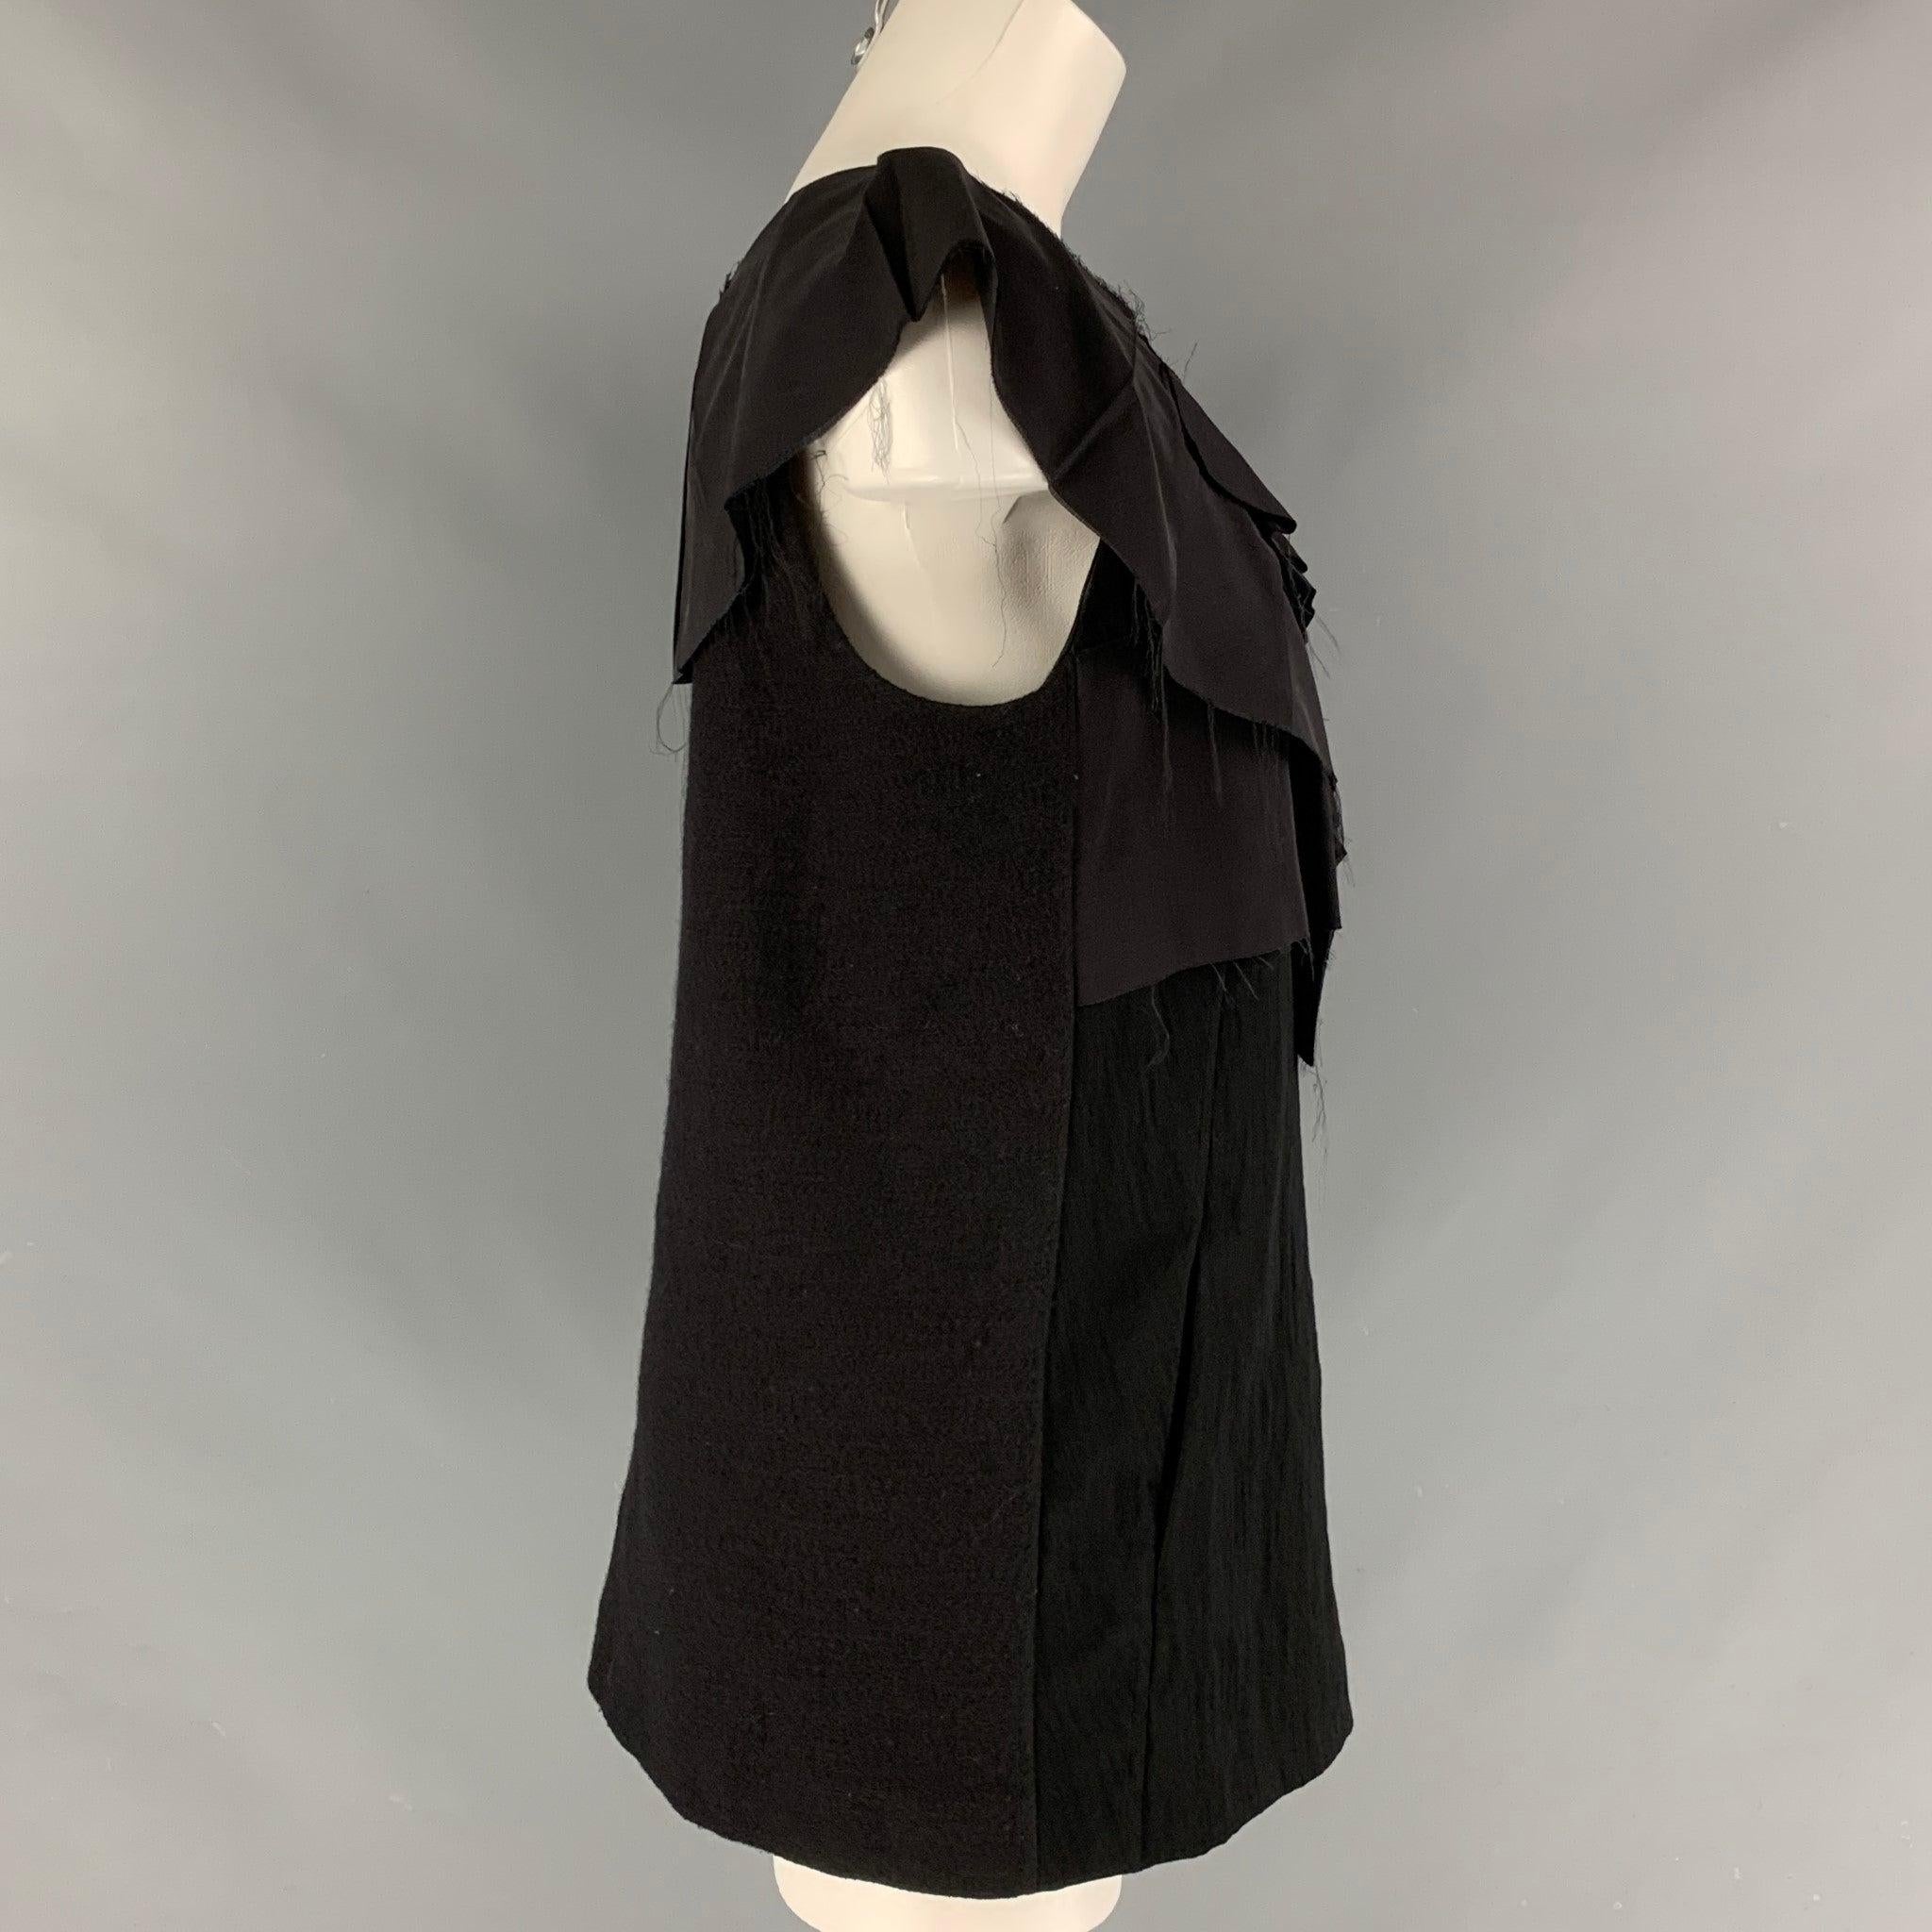 MARNI sleeveless v-neck blouse comes in a black wool and nylon featuring frontal pockets and ruffled detail at collar. Made in Italy.Excellent Pre-Owned Condition. 

Marked:   44 

Measurements: 
 
Shoulder: 15 inches Bust: 38 inches Length: 27